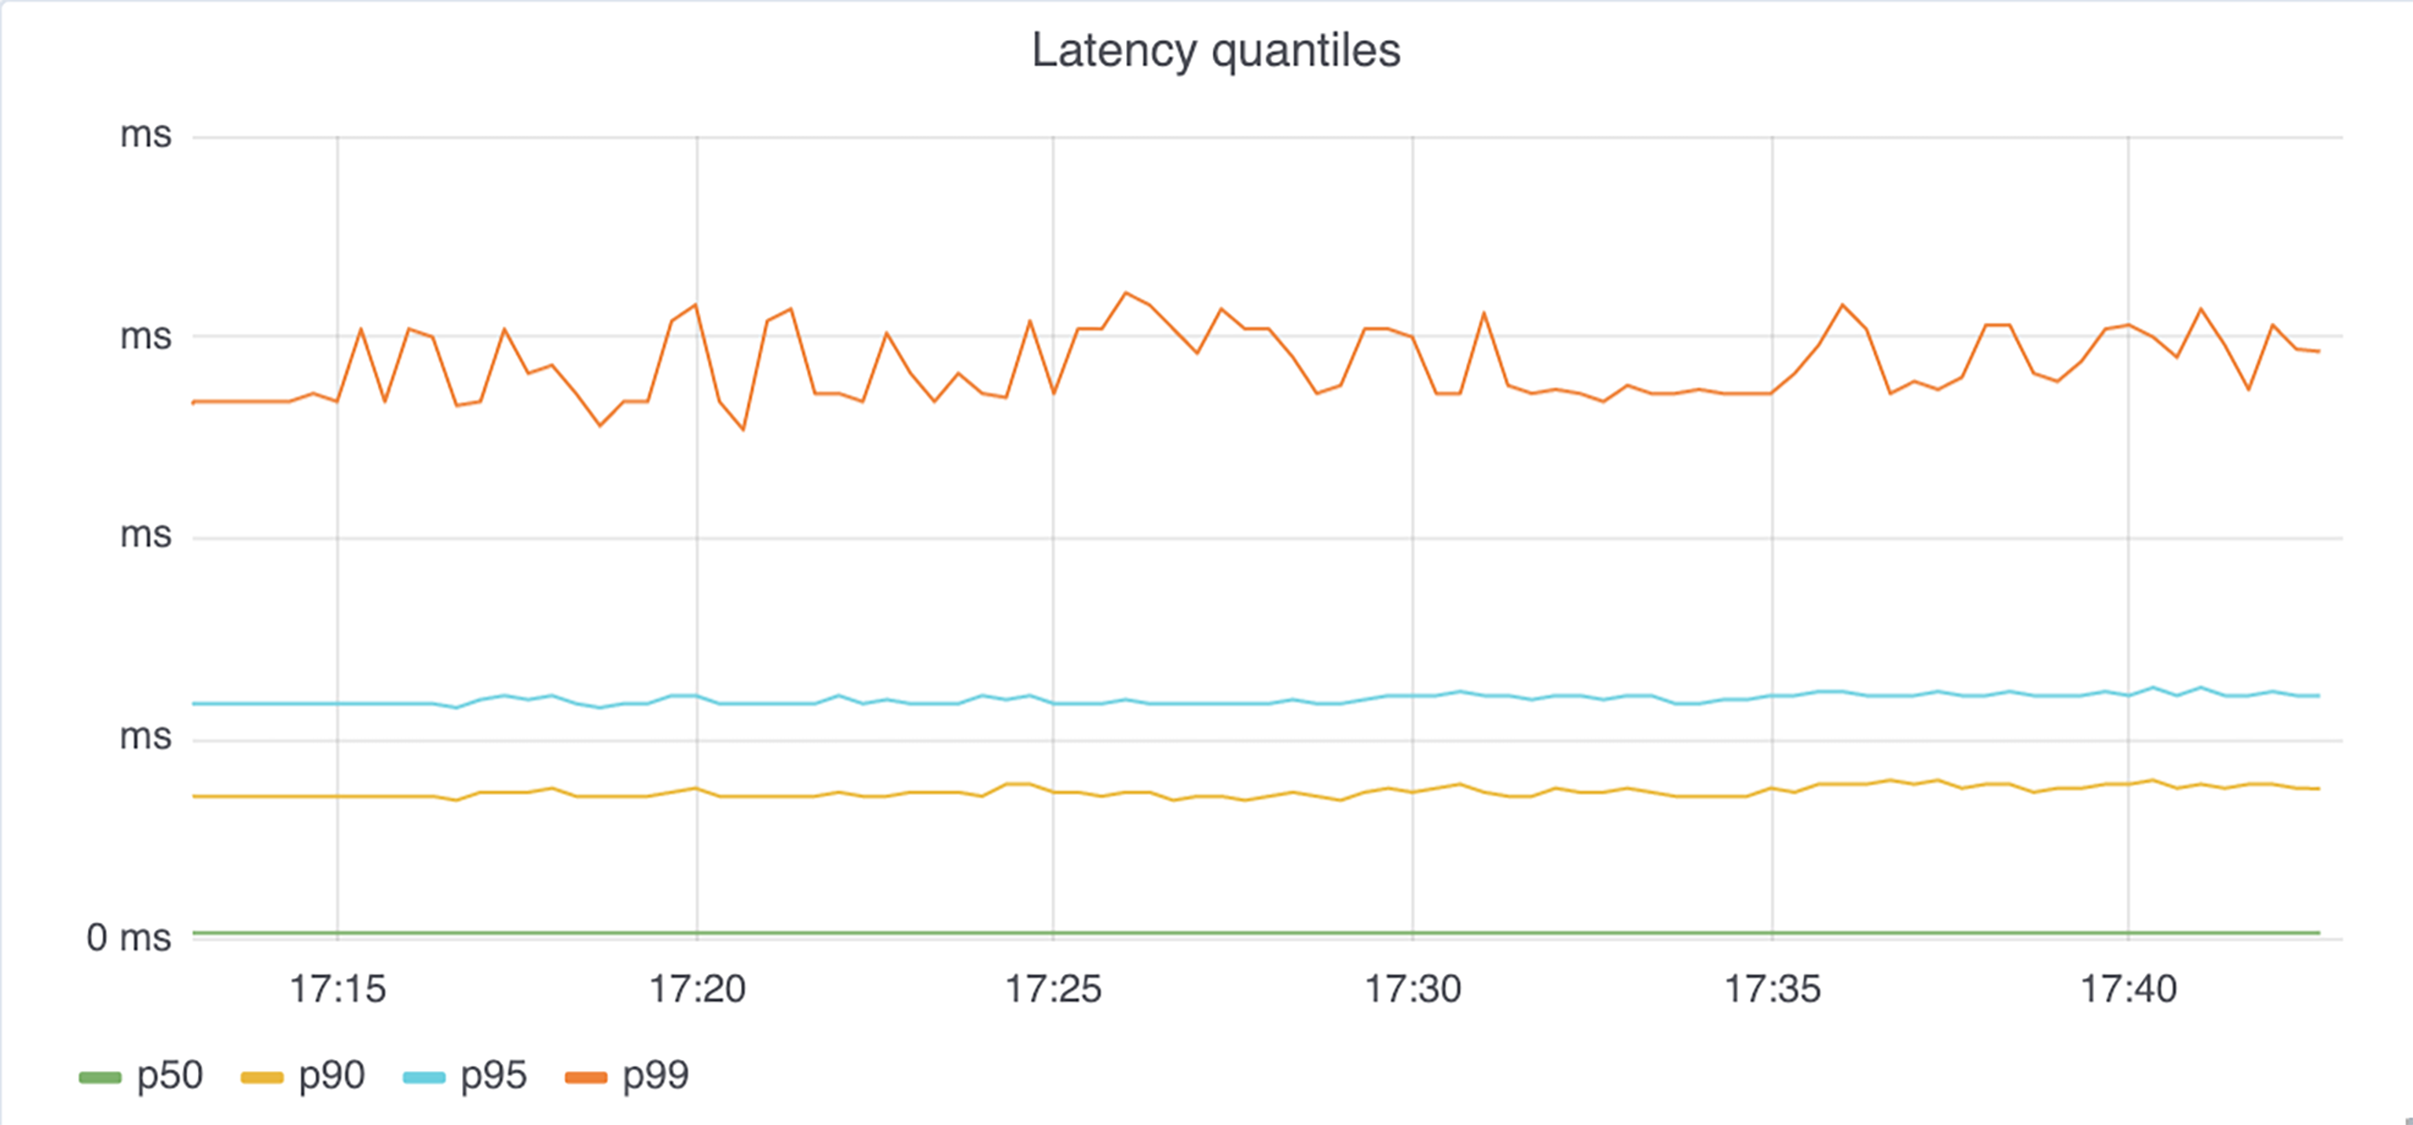 The second graph takes into account the overall latency of the requests by including connection setup time. 